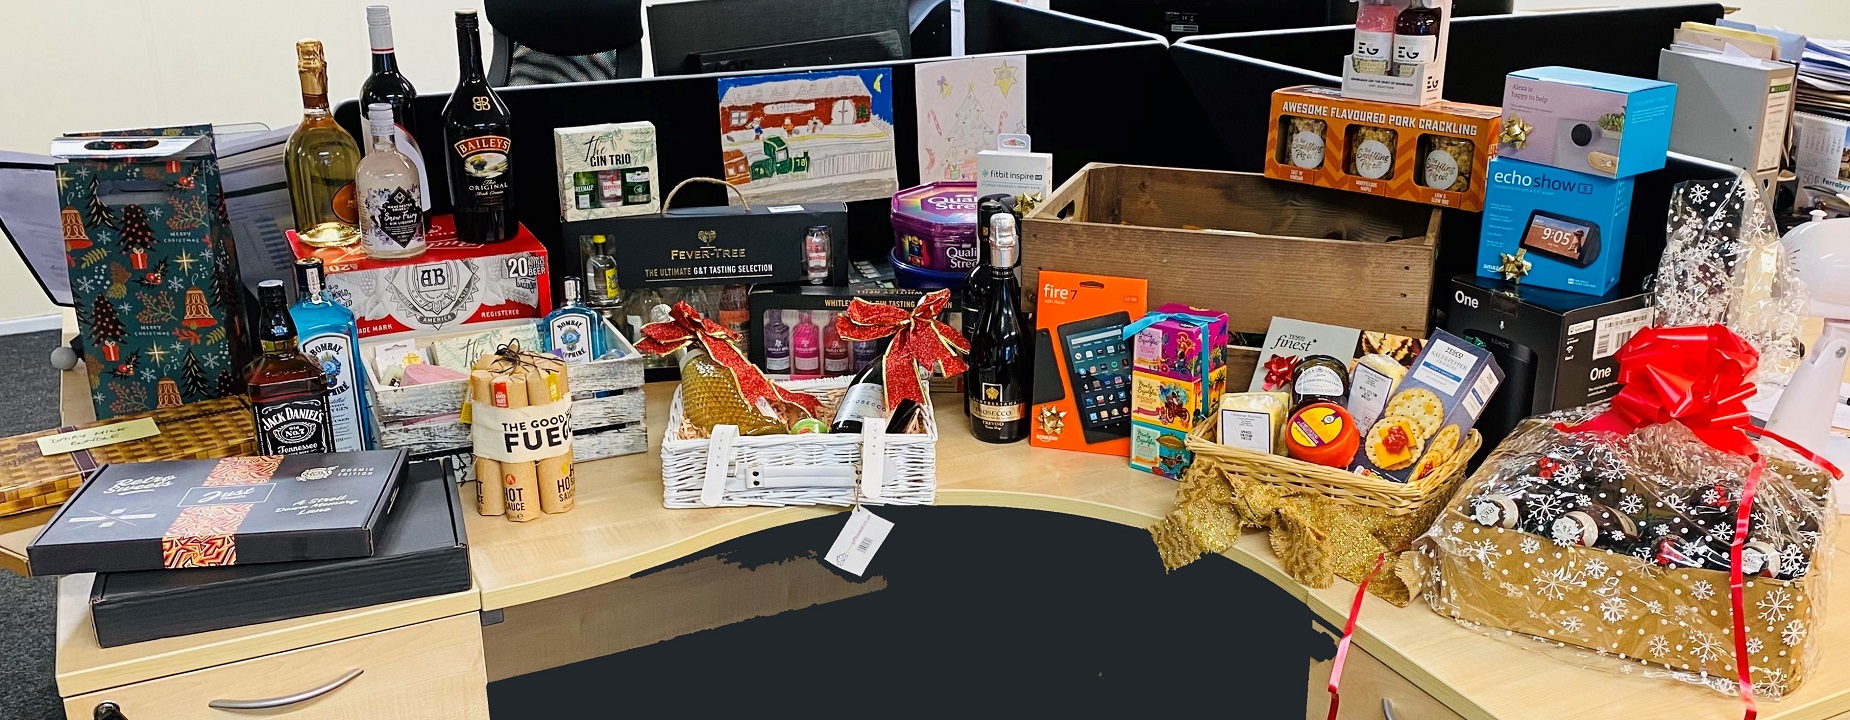 Christmas 2020 Charity raffle to benefit local schools